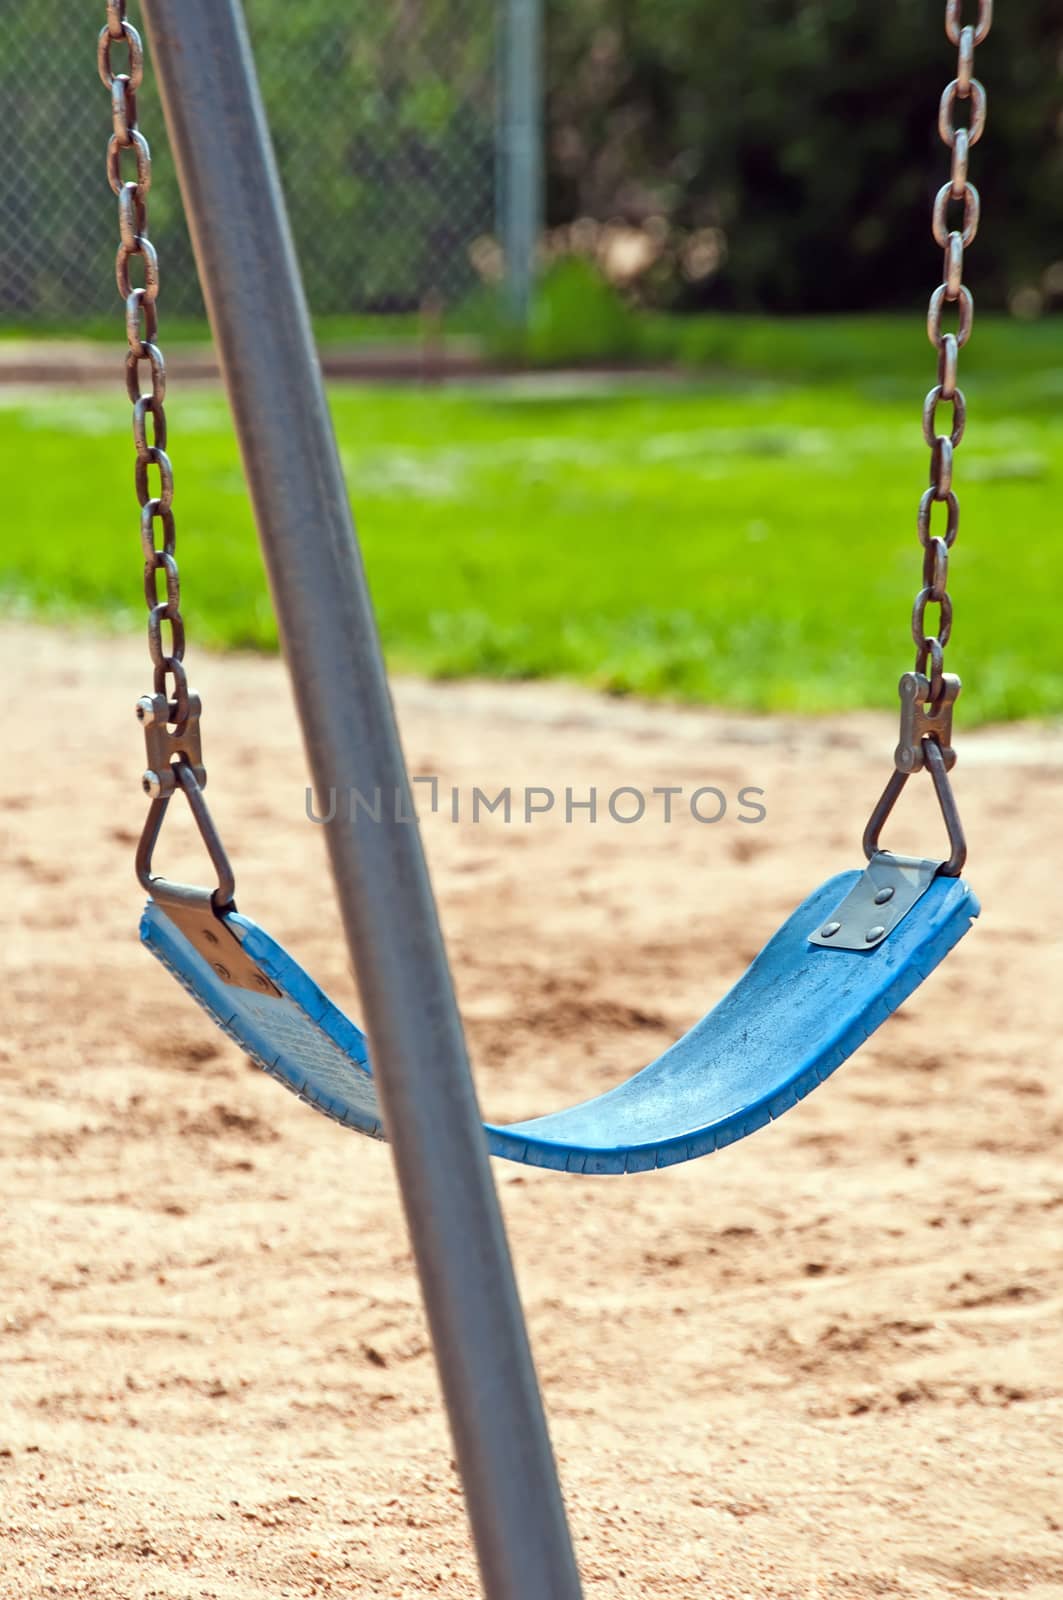 One Lonesome Swing by rcarner